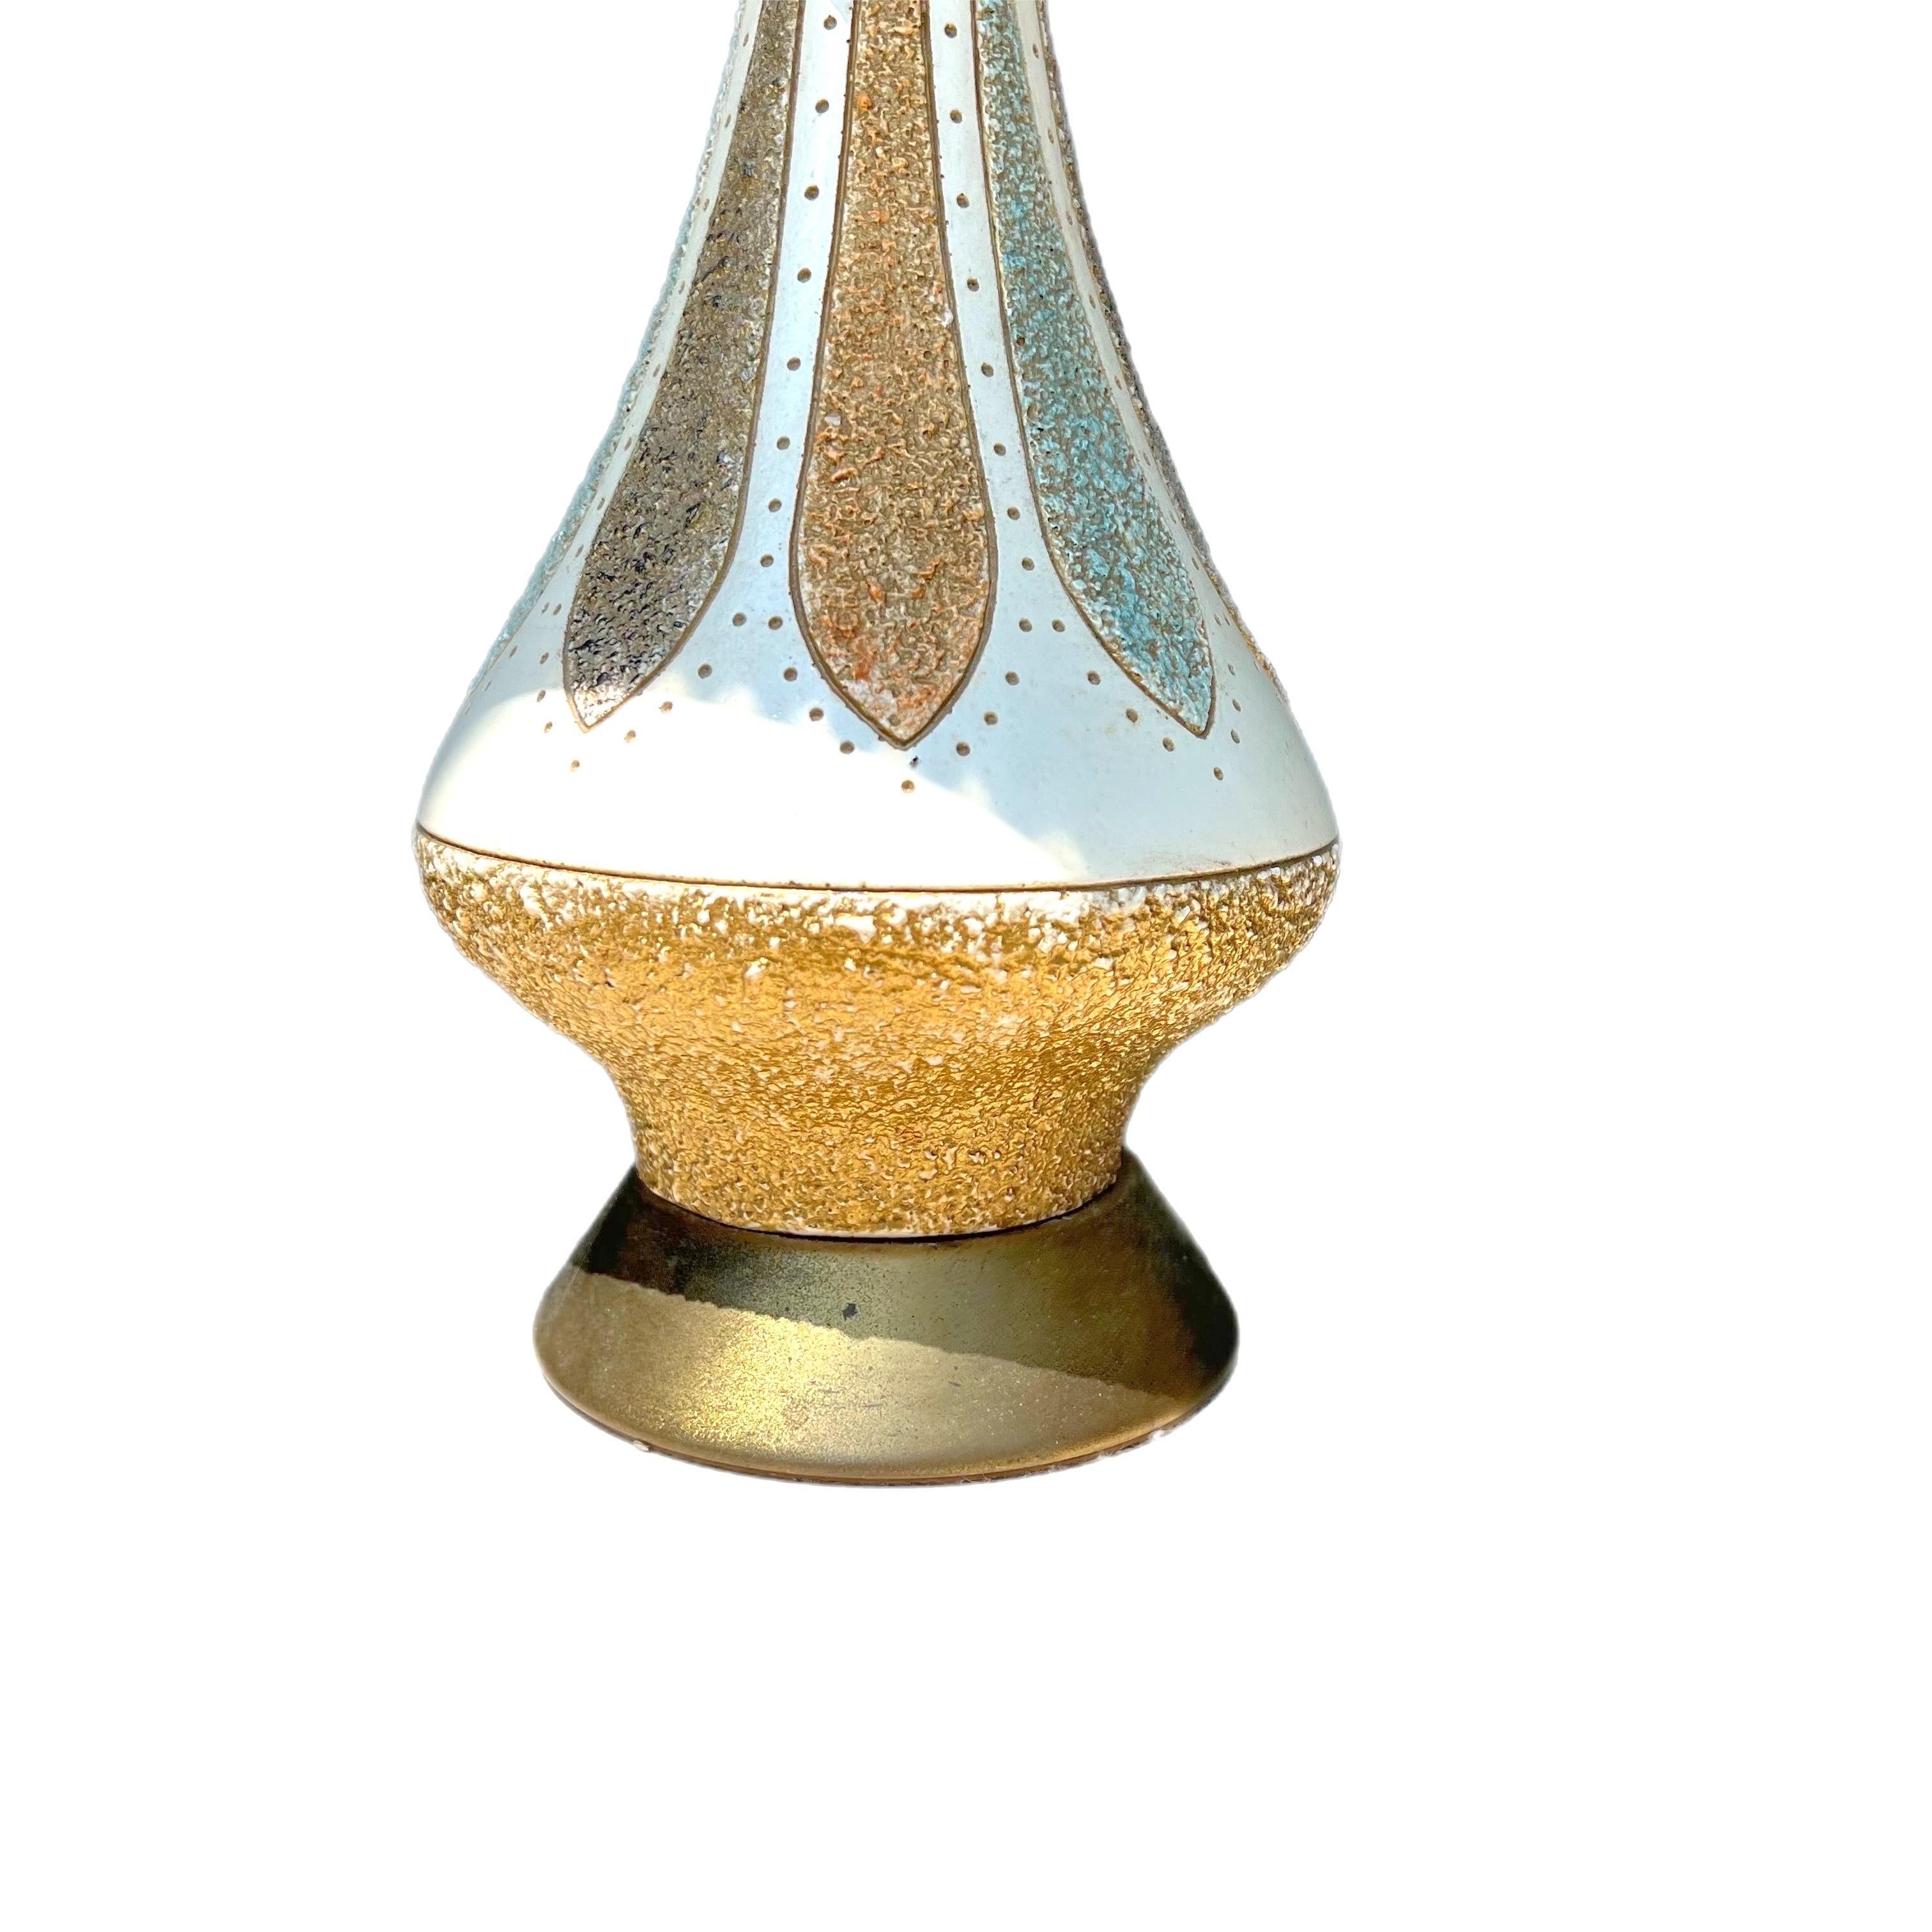 A fabulous colorful Quartzite lamp with a textured body, on a brass base.   The lamp and shade are cream colored and the shade is still in the plastic with no flaws as far as I can tell.  The lamp itself is decorated with turquoise, orange, black,